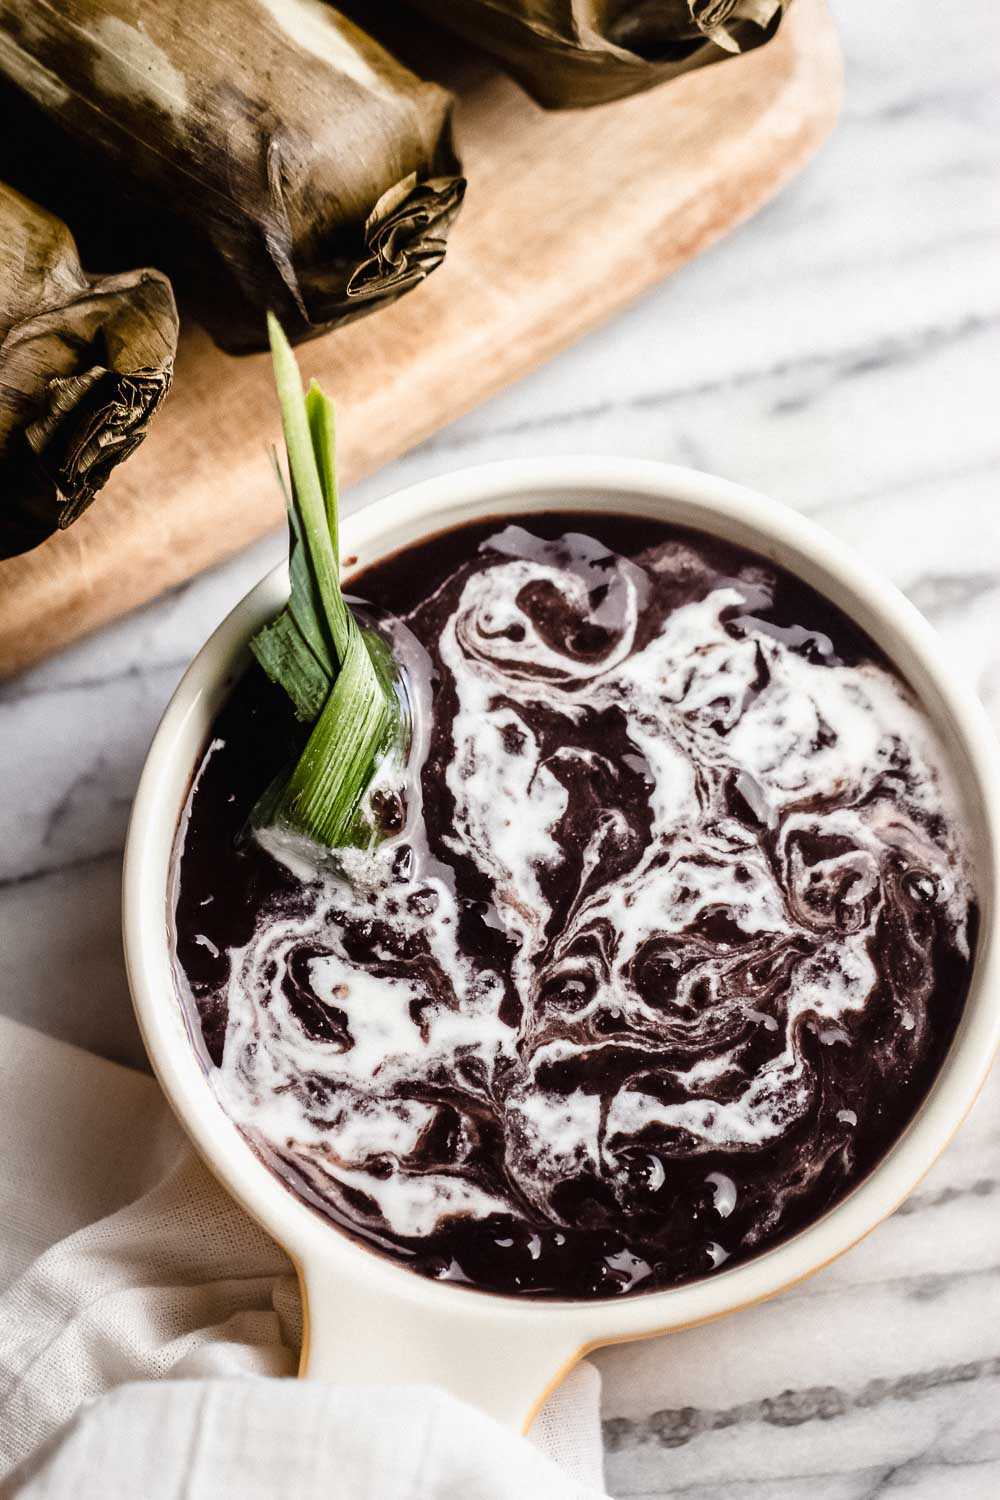 This bubur ketan hitam (glutinous black rice sweet porridge) recipe is perfect for breakfast or a snack. Light and delicious made with black glutinous rice and coconut milk, plus healthy, packed full of iron, protein, and antioxidants!